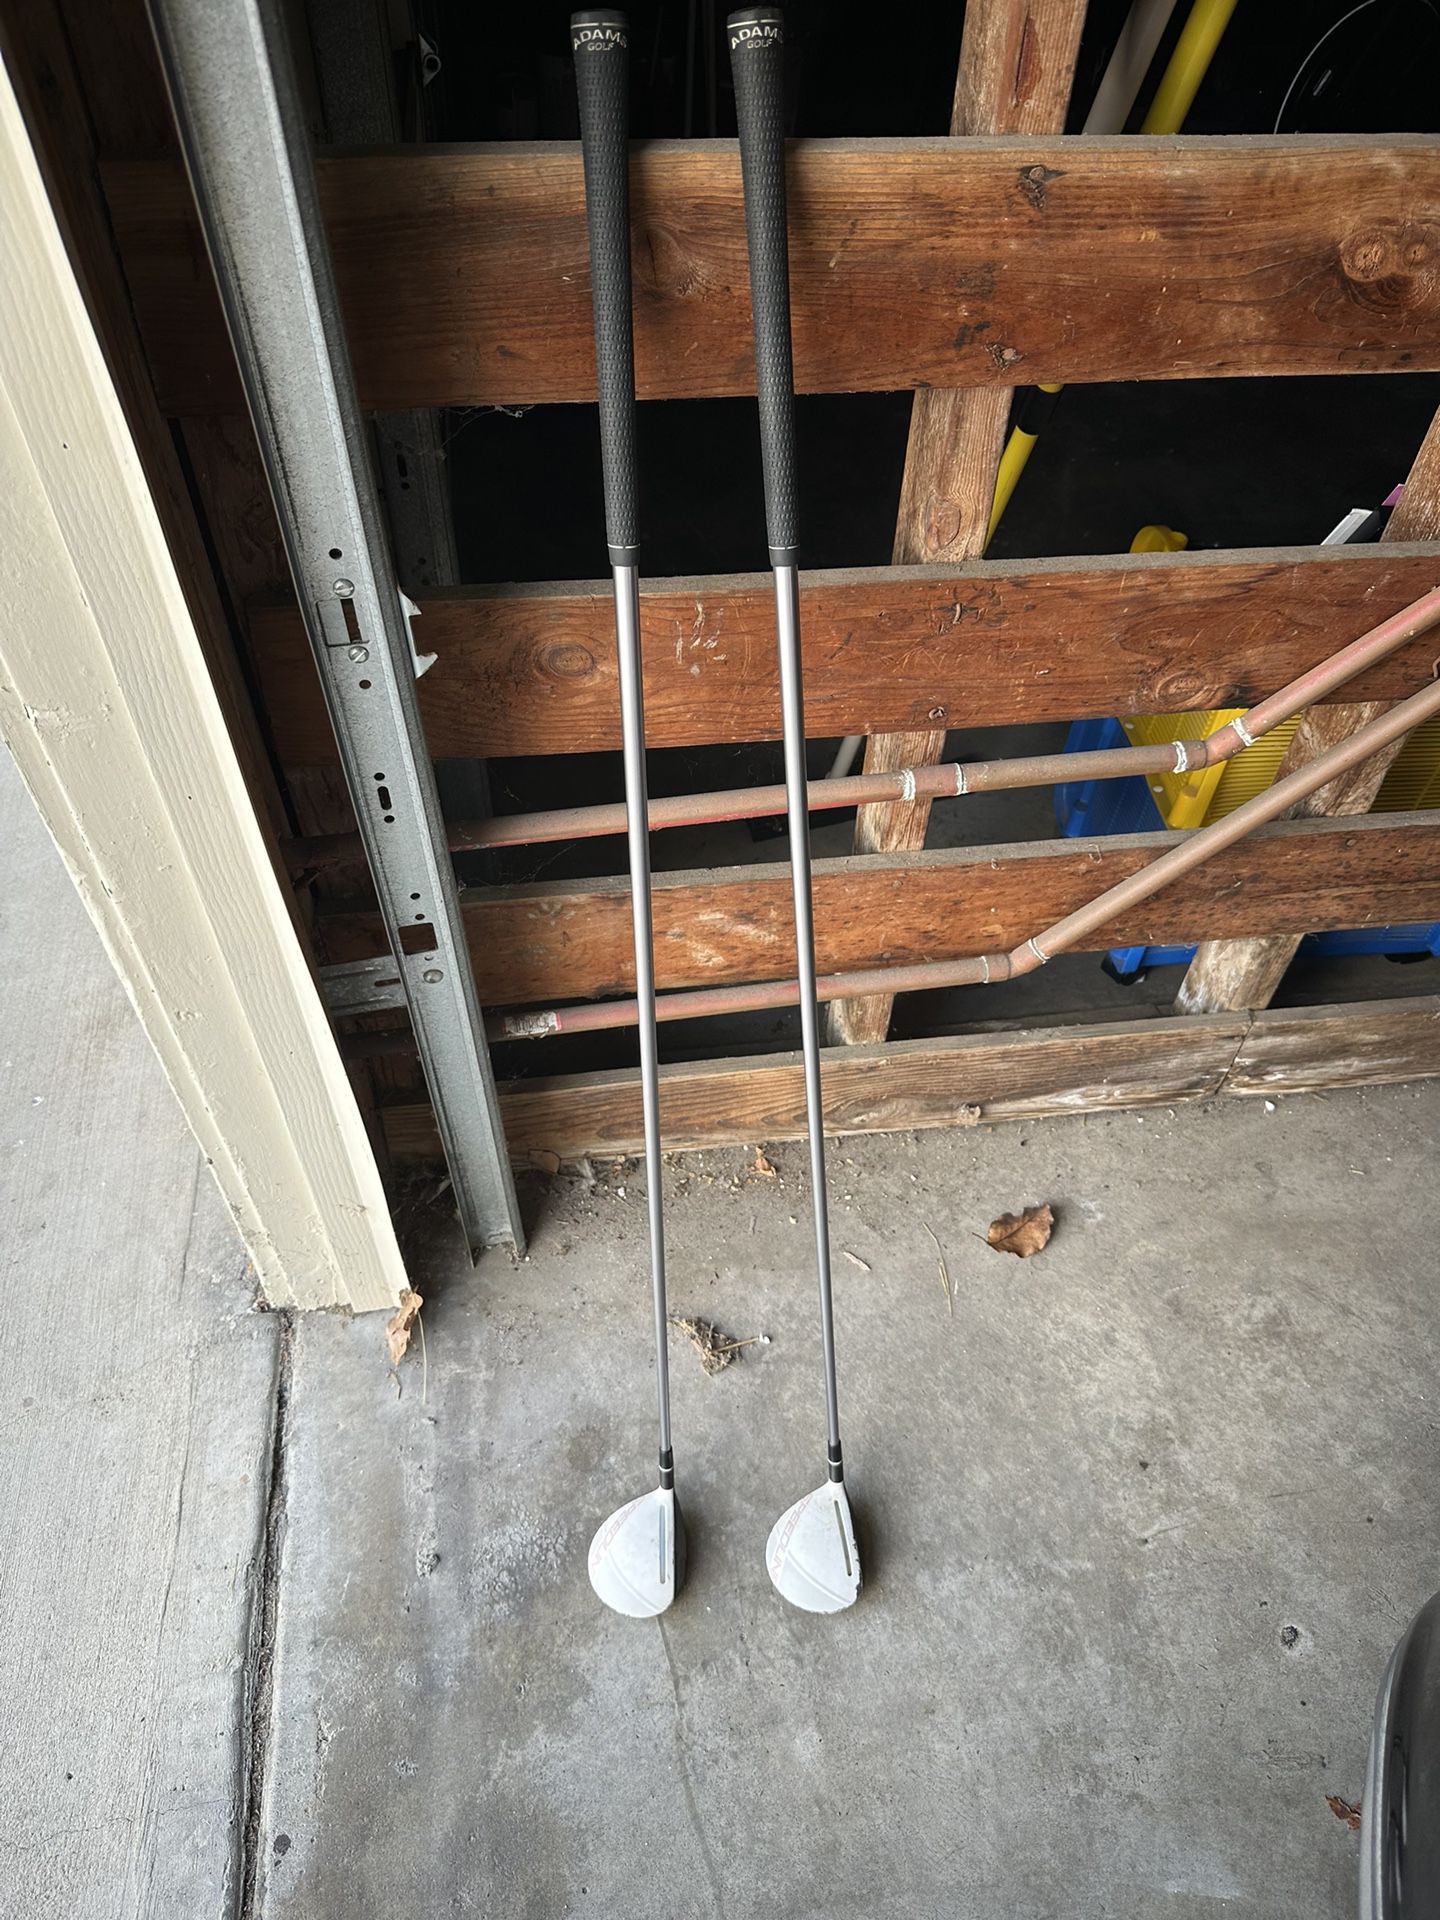 Miscellaneous Golf Clubs